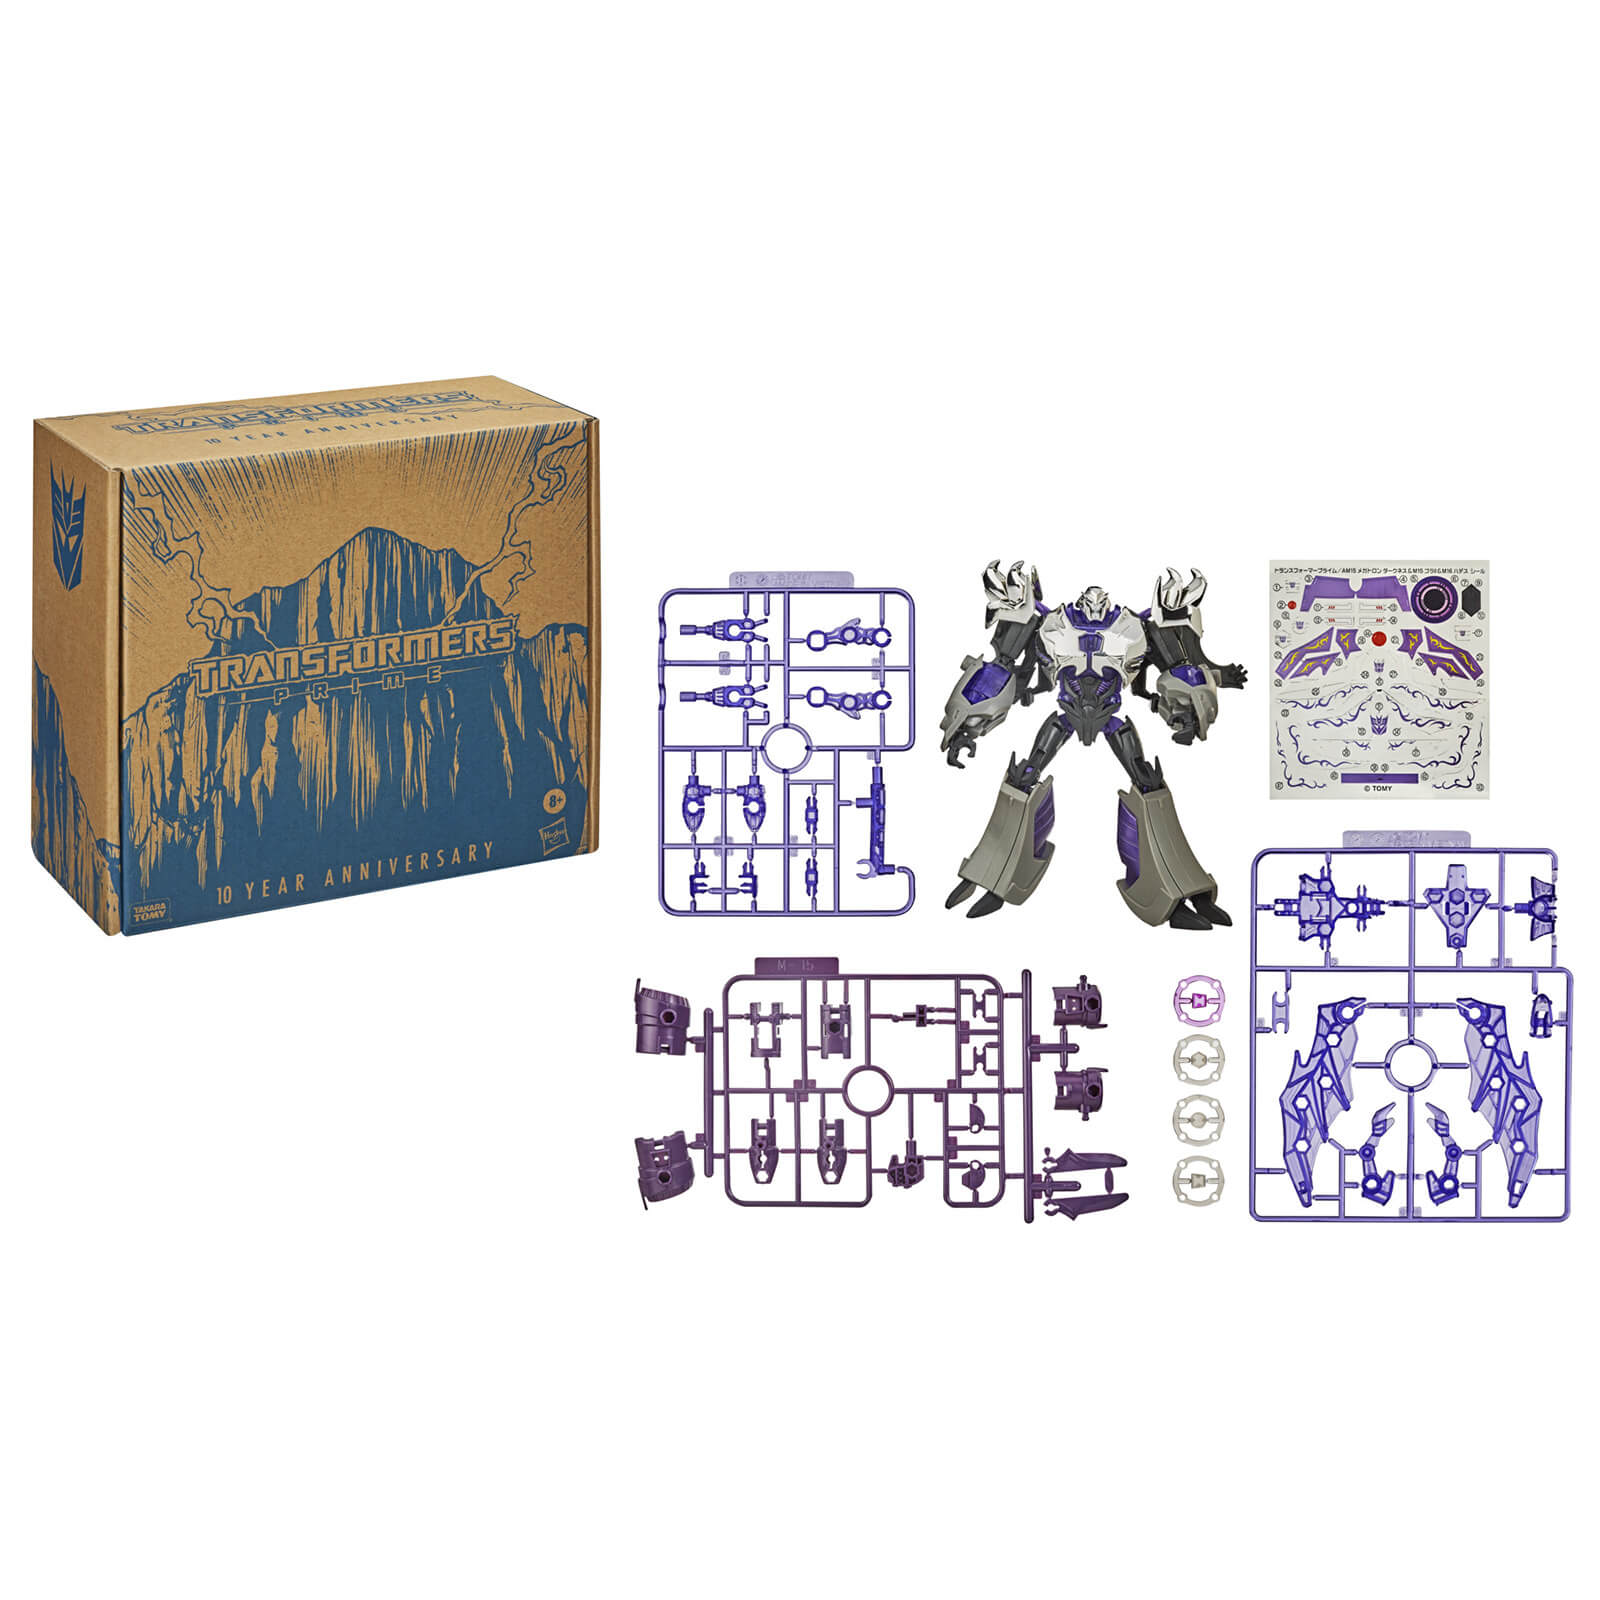 Hasbro Transformers: Prime Hades Megatron Action Figure Re-Issued Version